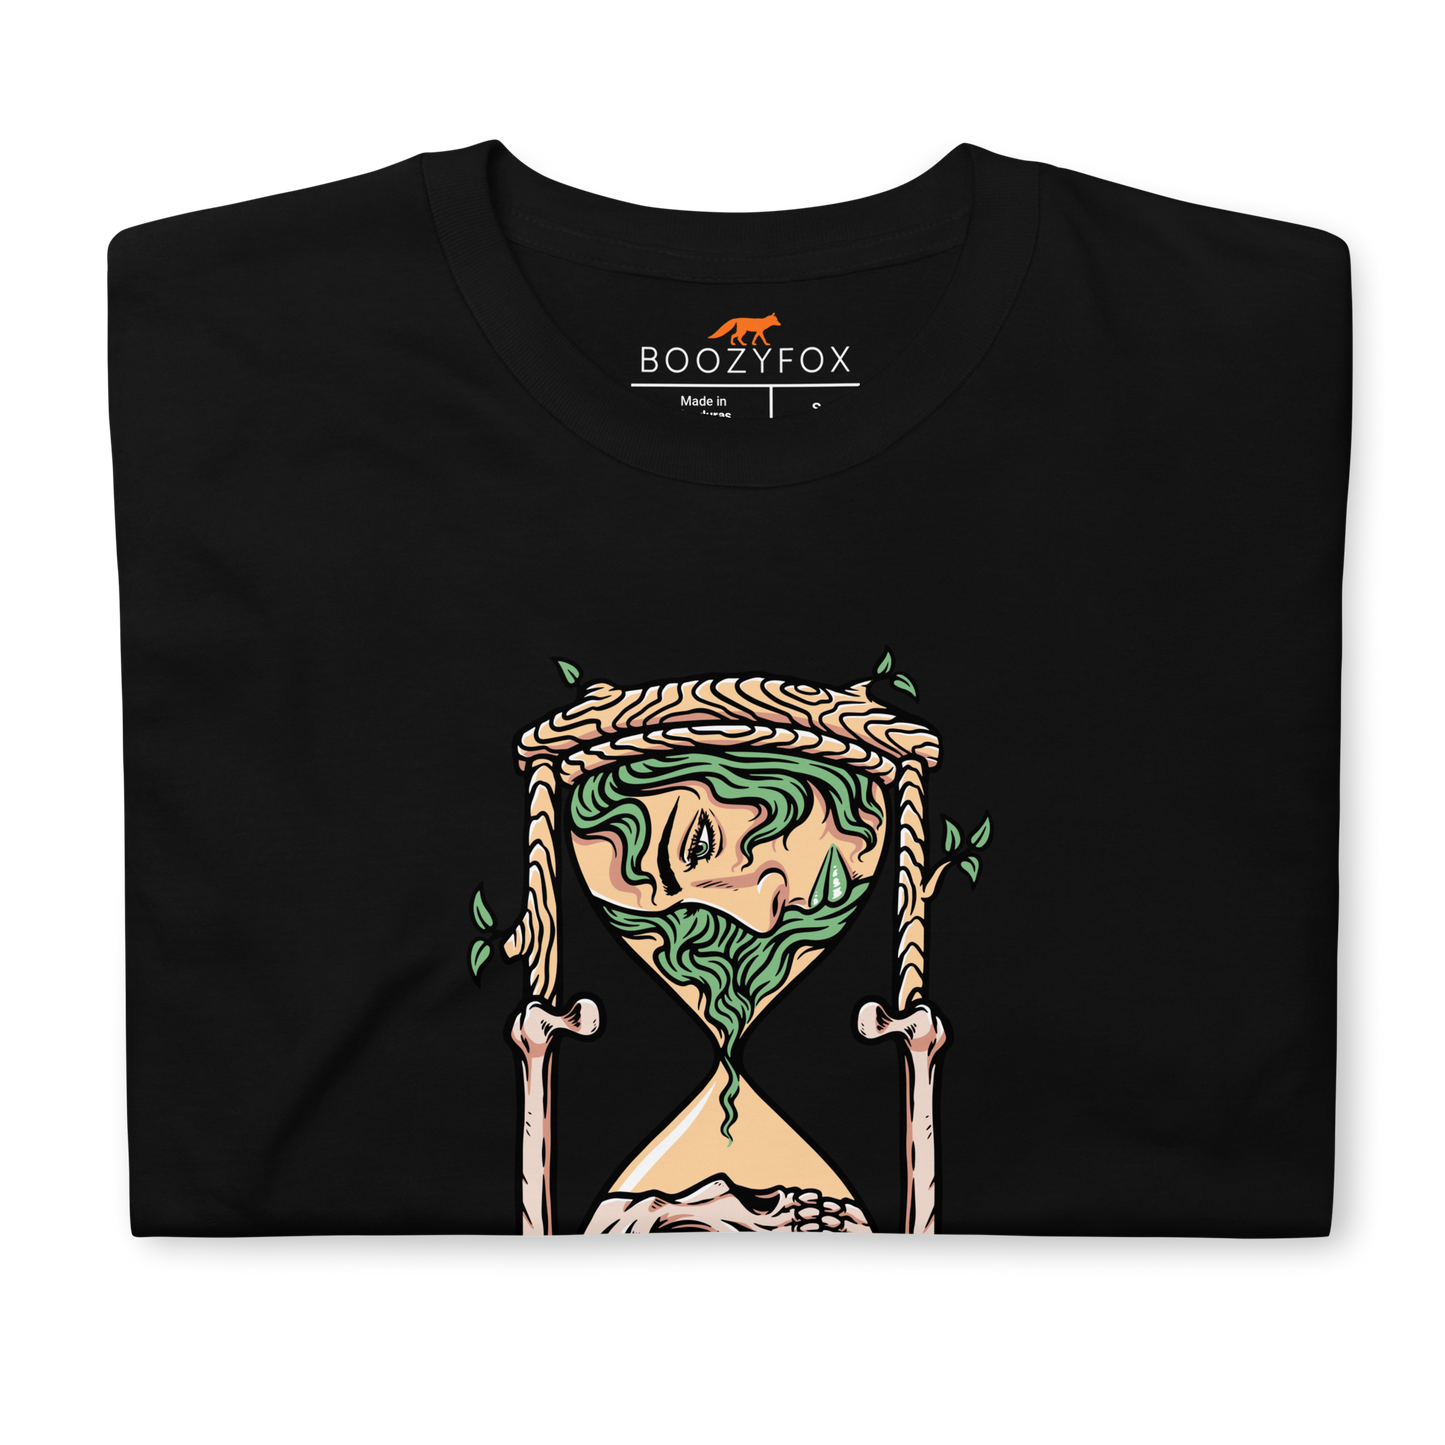 Front details of a Black Hourglass T-Shirt featuring a captivating Time Won't Wait graphic on the chest - Cool Graphic Hourglass T-Shirts - Boozy Fox